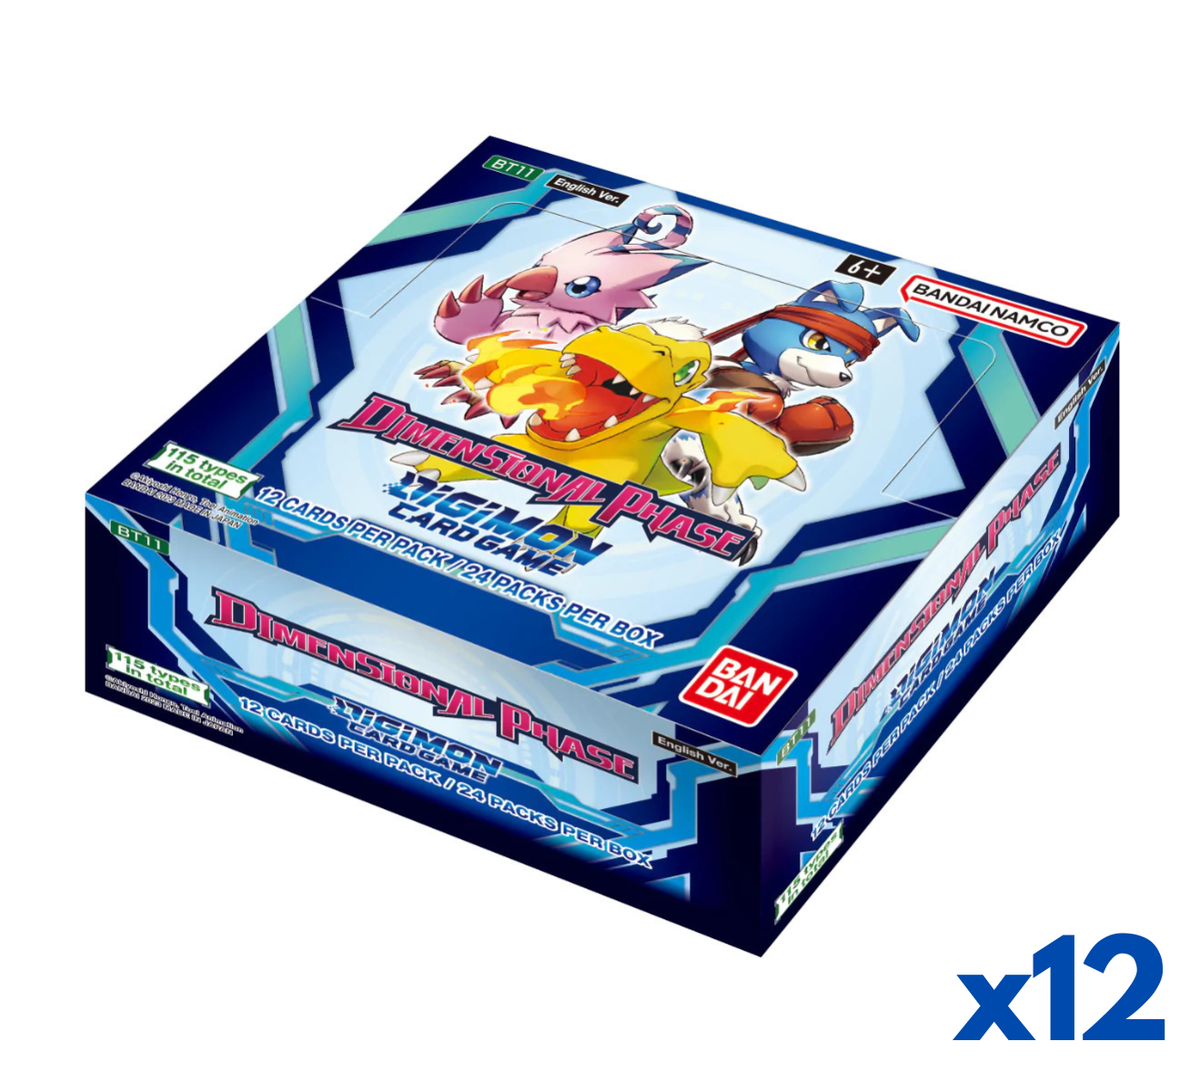 Digimon Card Game Dimensional Phase BT11 Booster Case